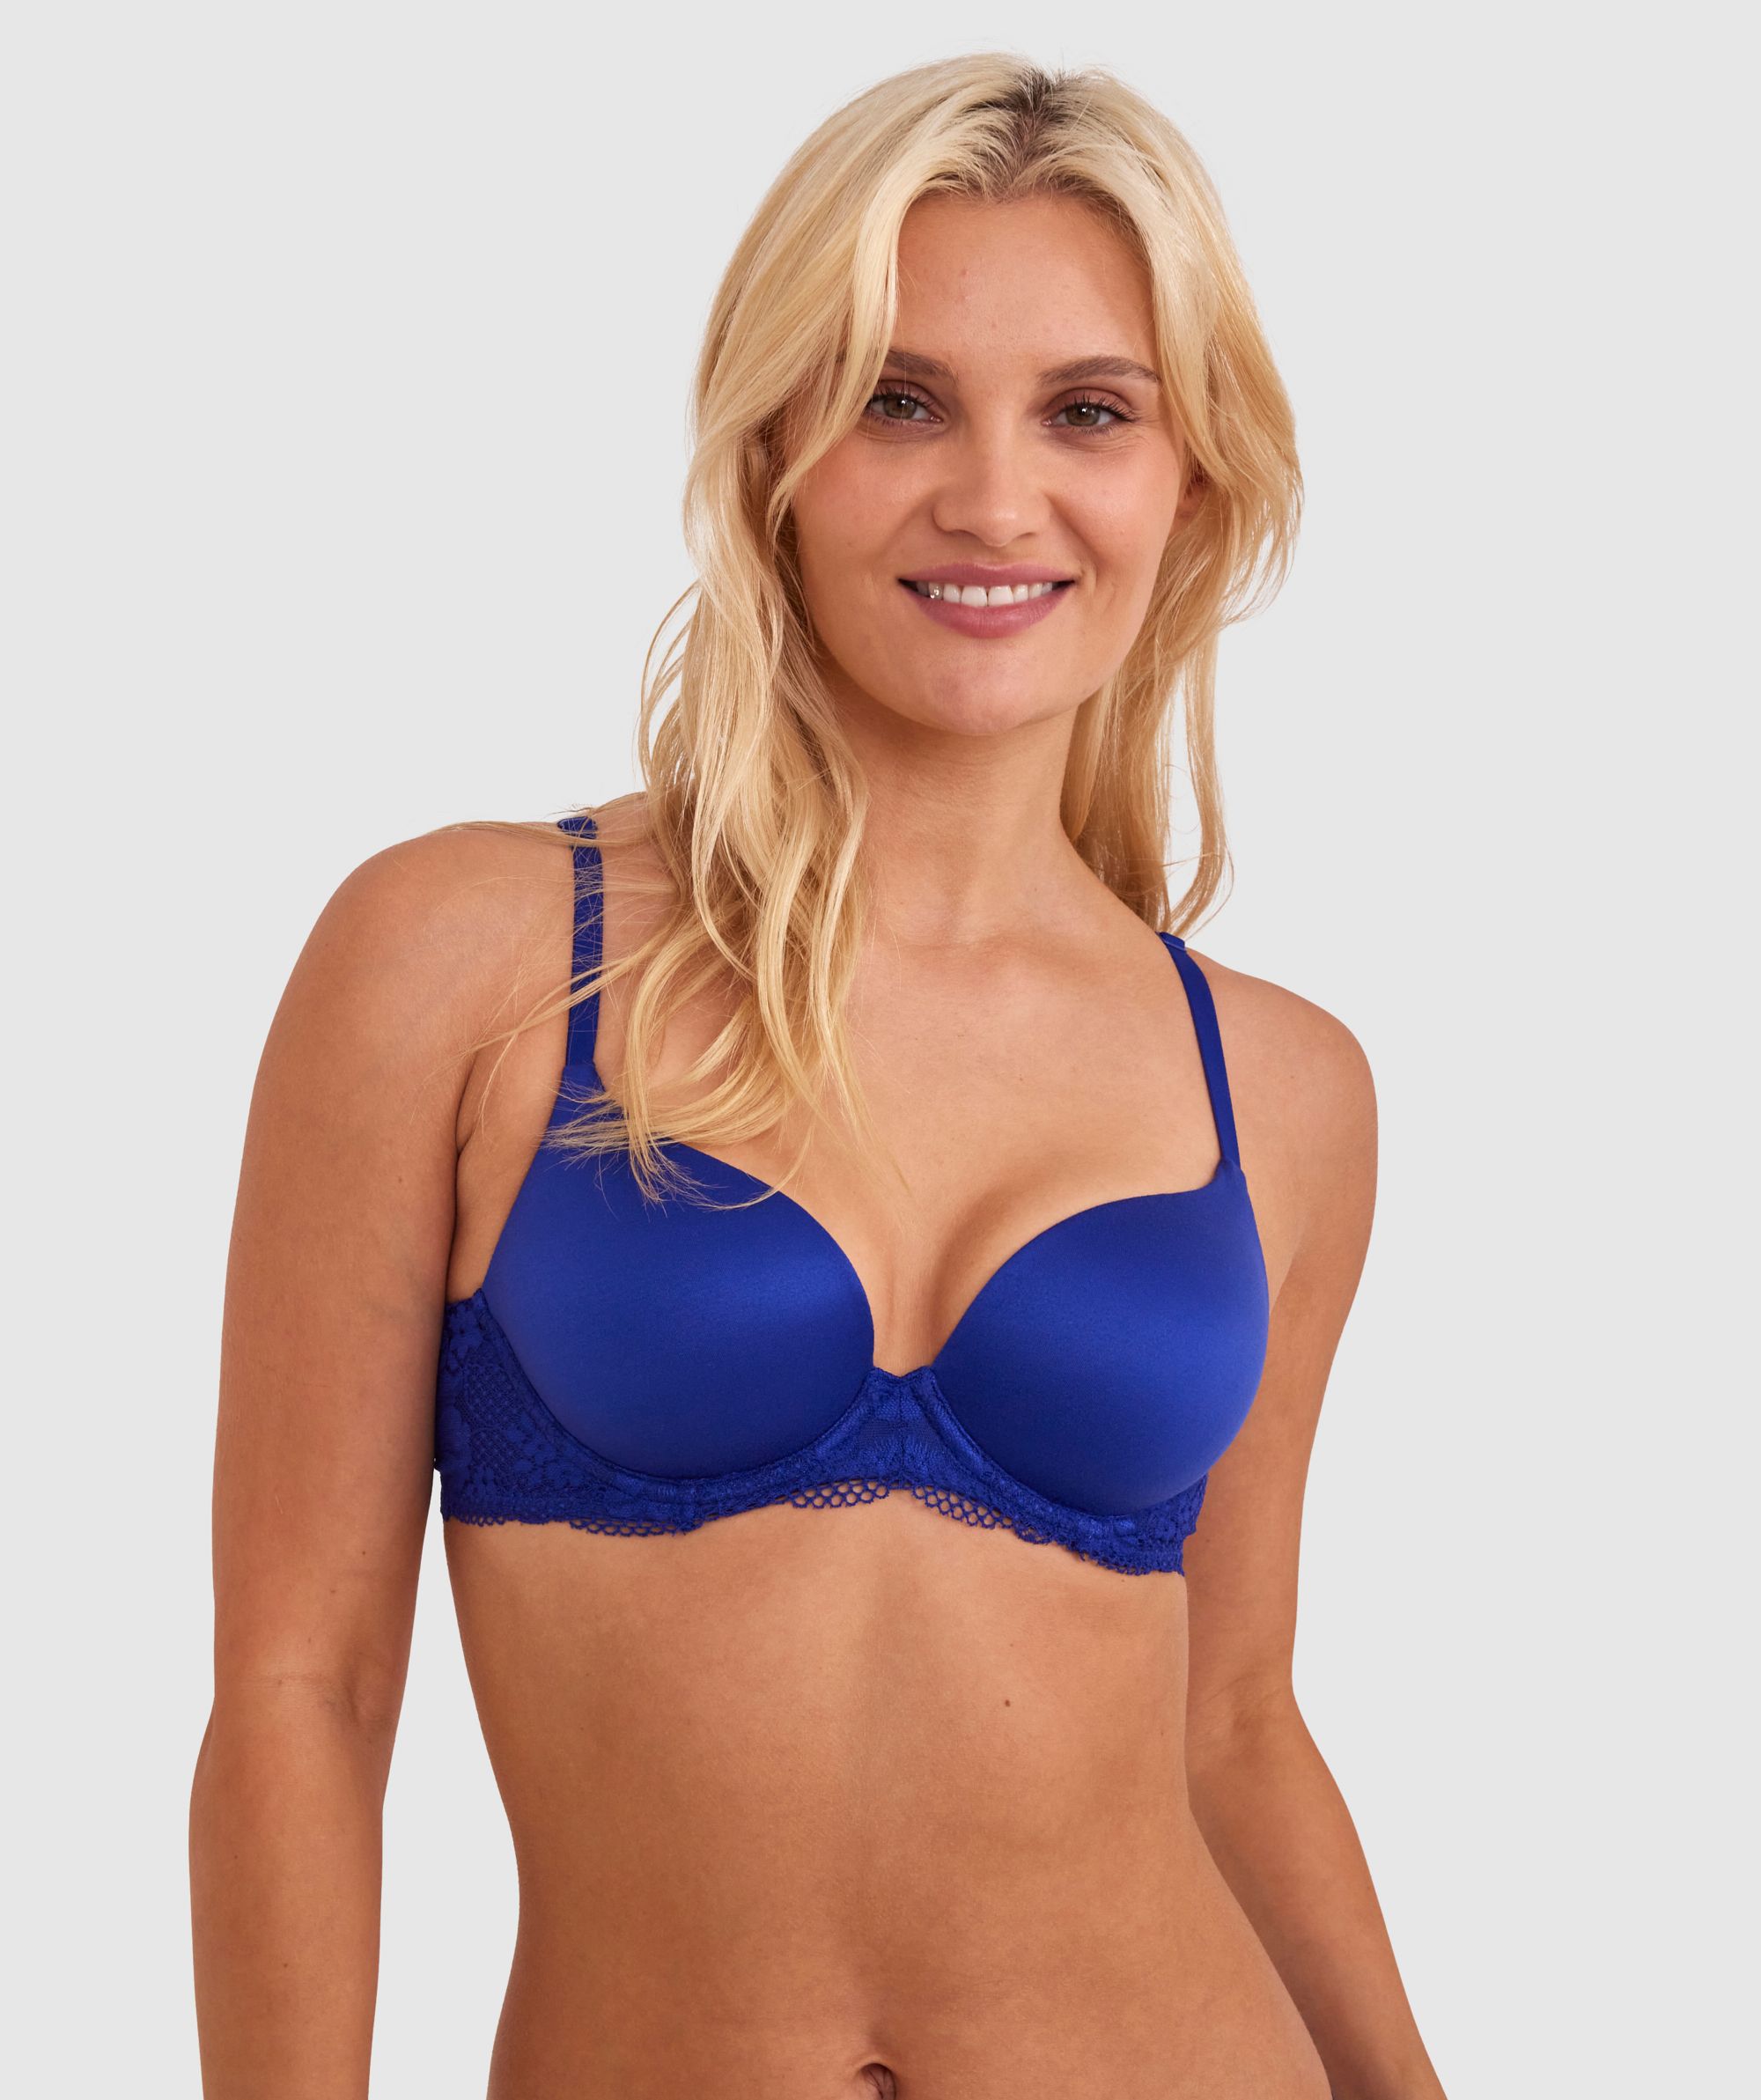 Bras N Things Body Bliss Lace Contour Plunge Bra - Navy